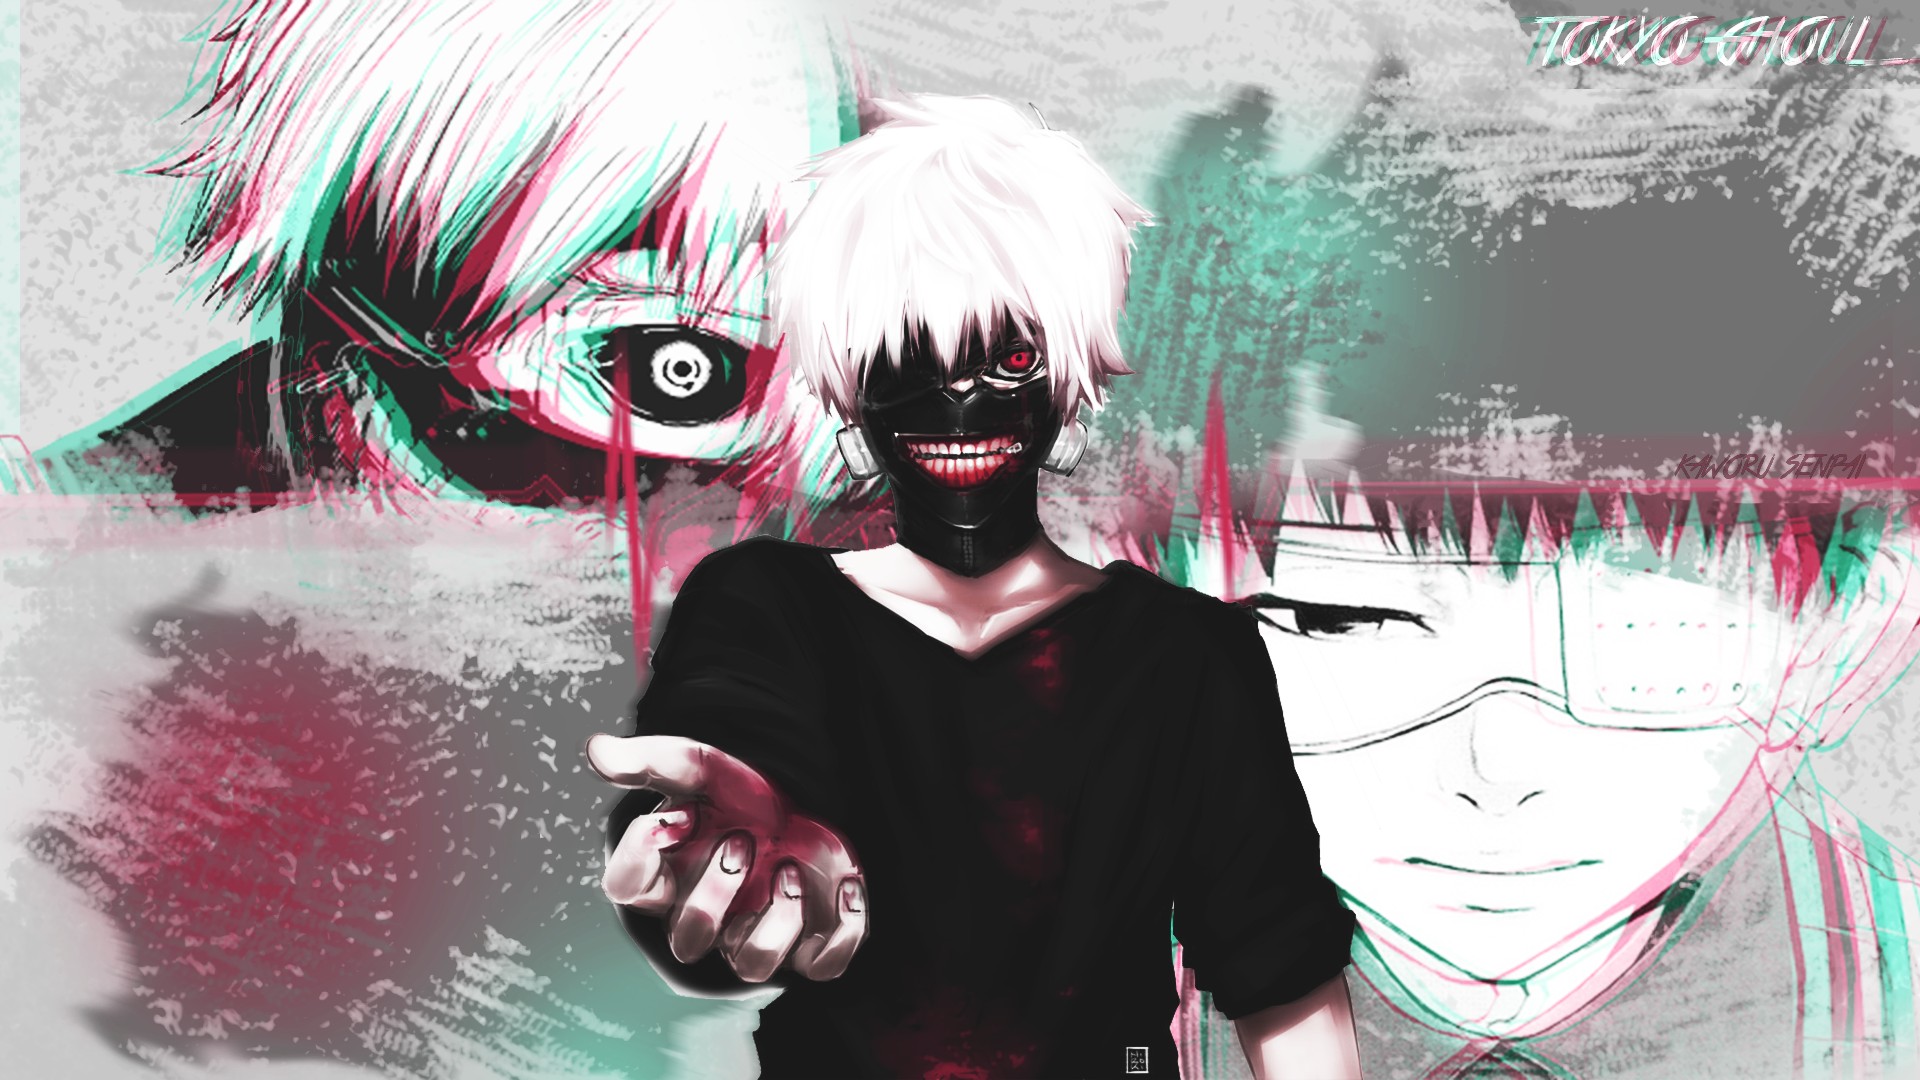 Tokyo Ghoul wallpaper HD ·① Download free cool backgrounds ...